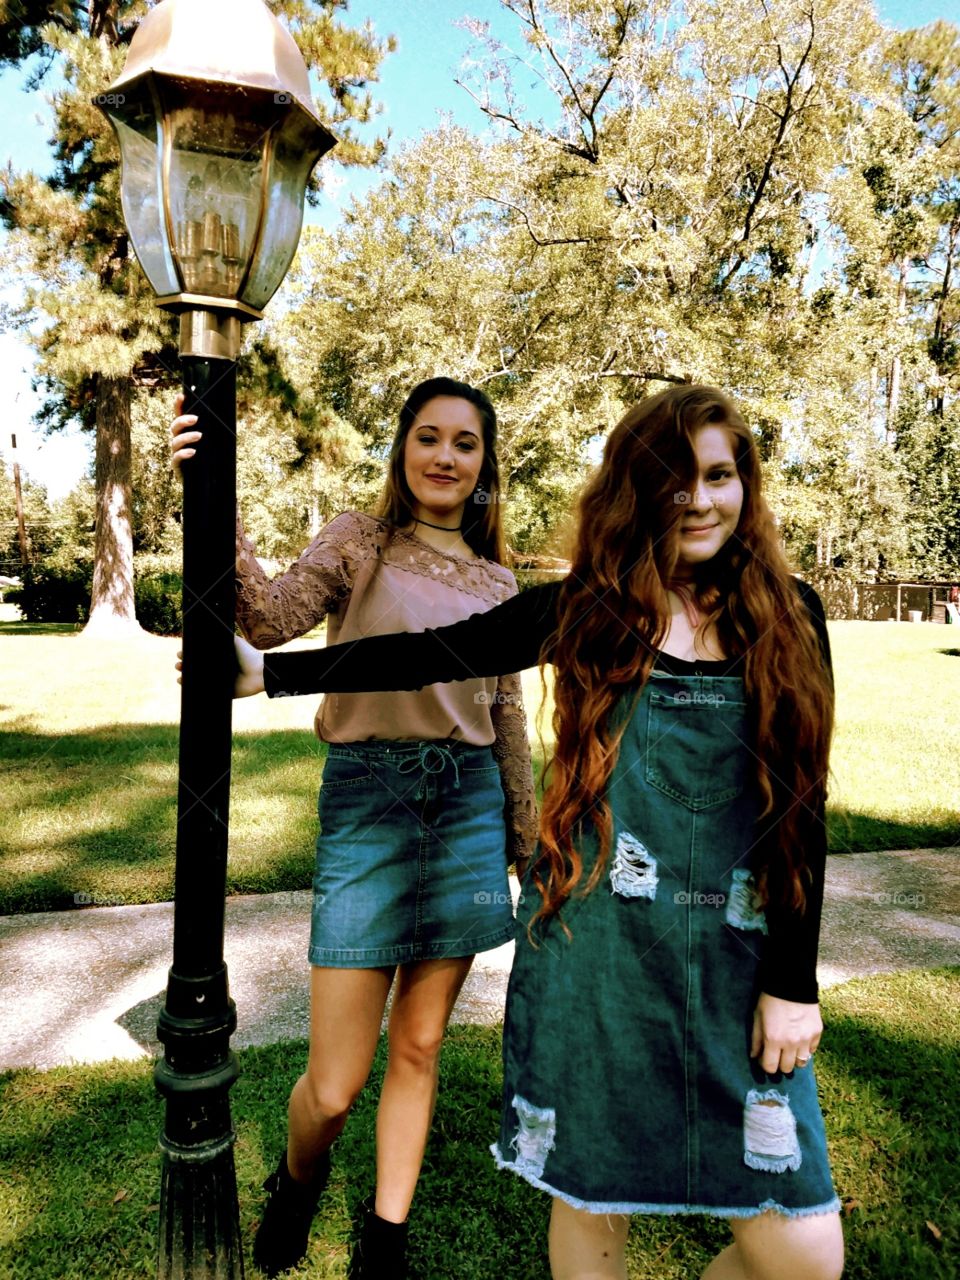 Two beautiful girls by a lamp post in the fall